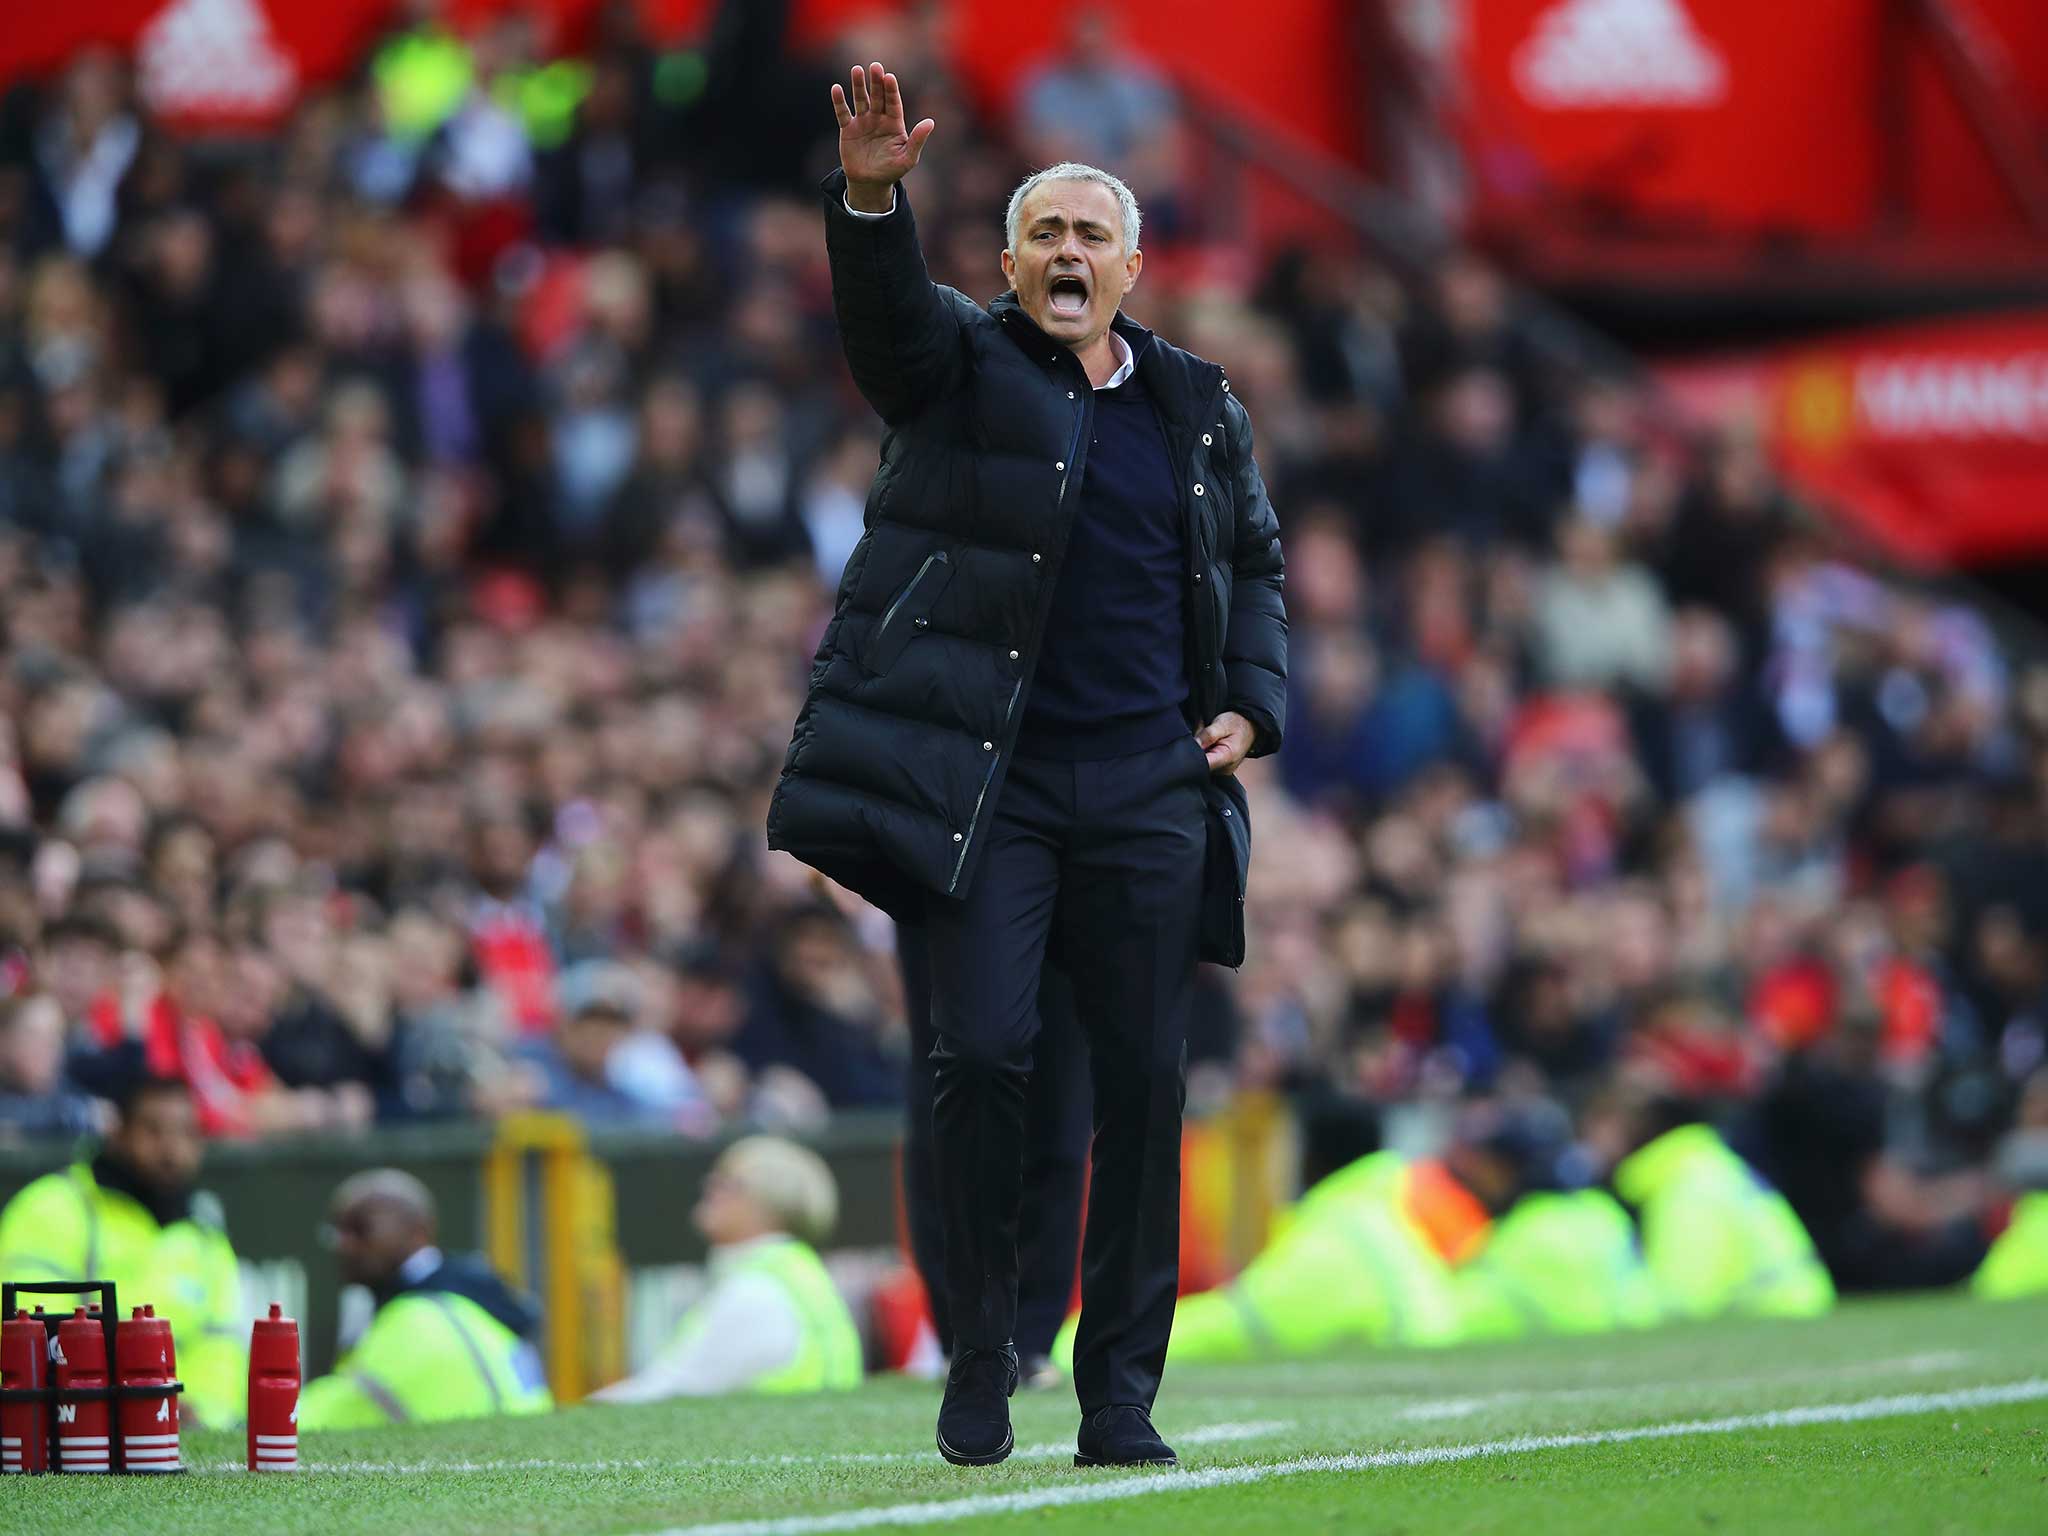 Jose Mourinho protests on the side-lines at Old Trafford